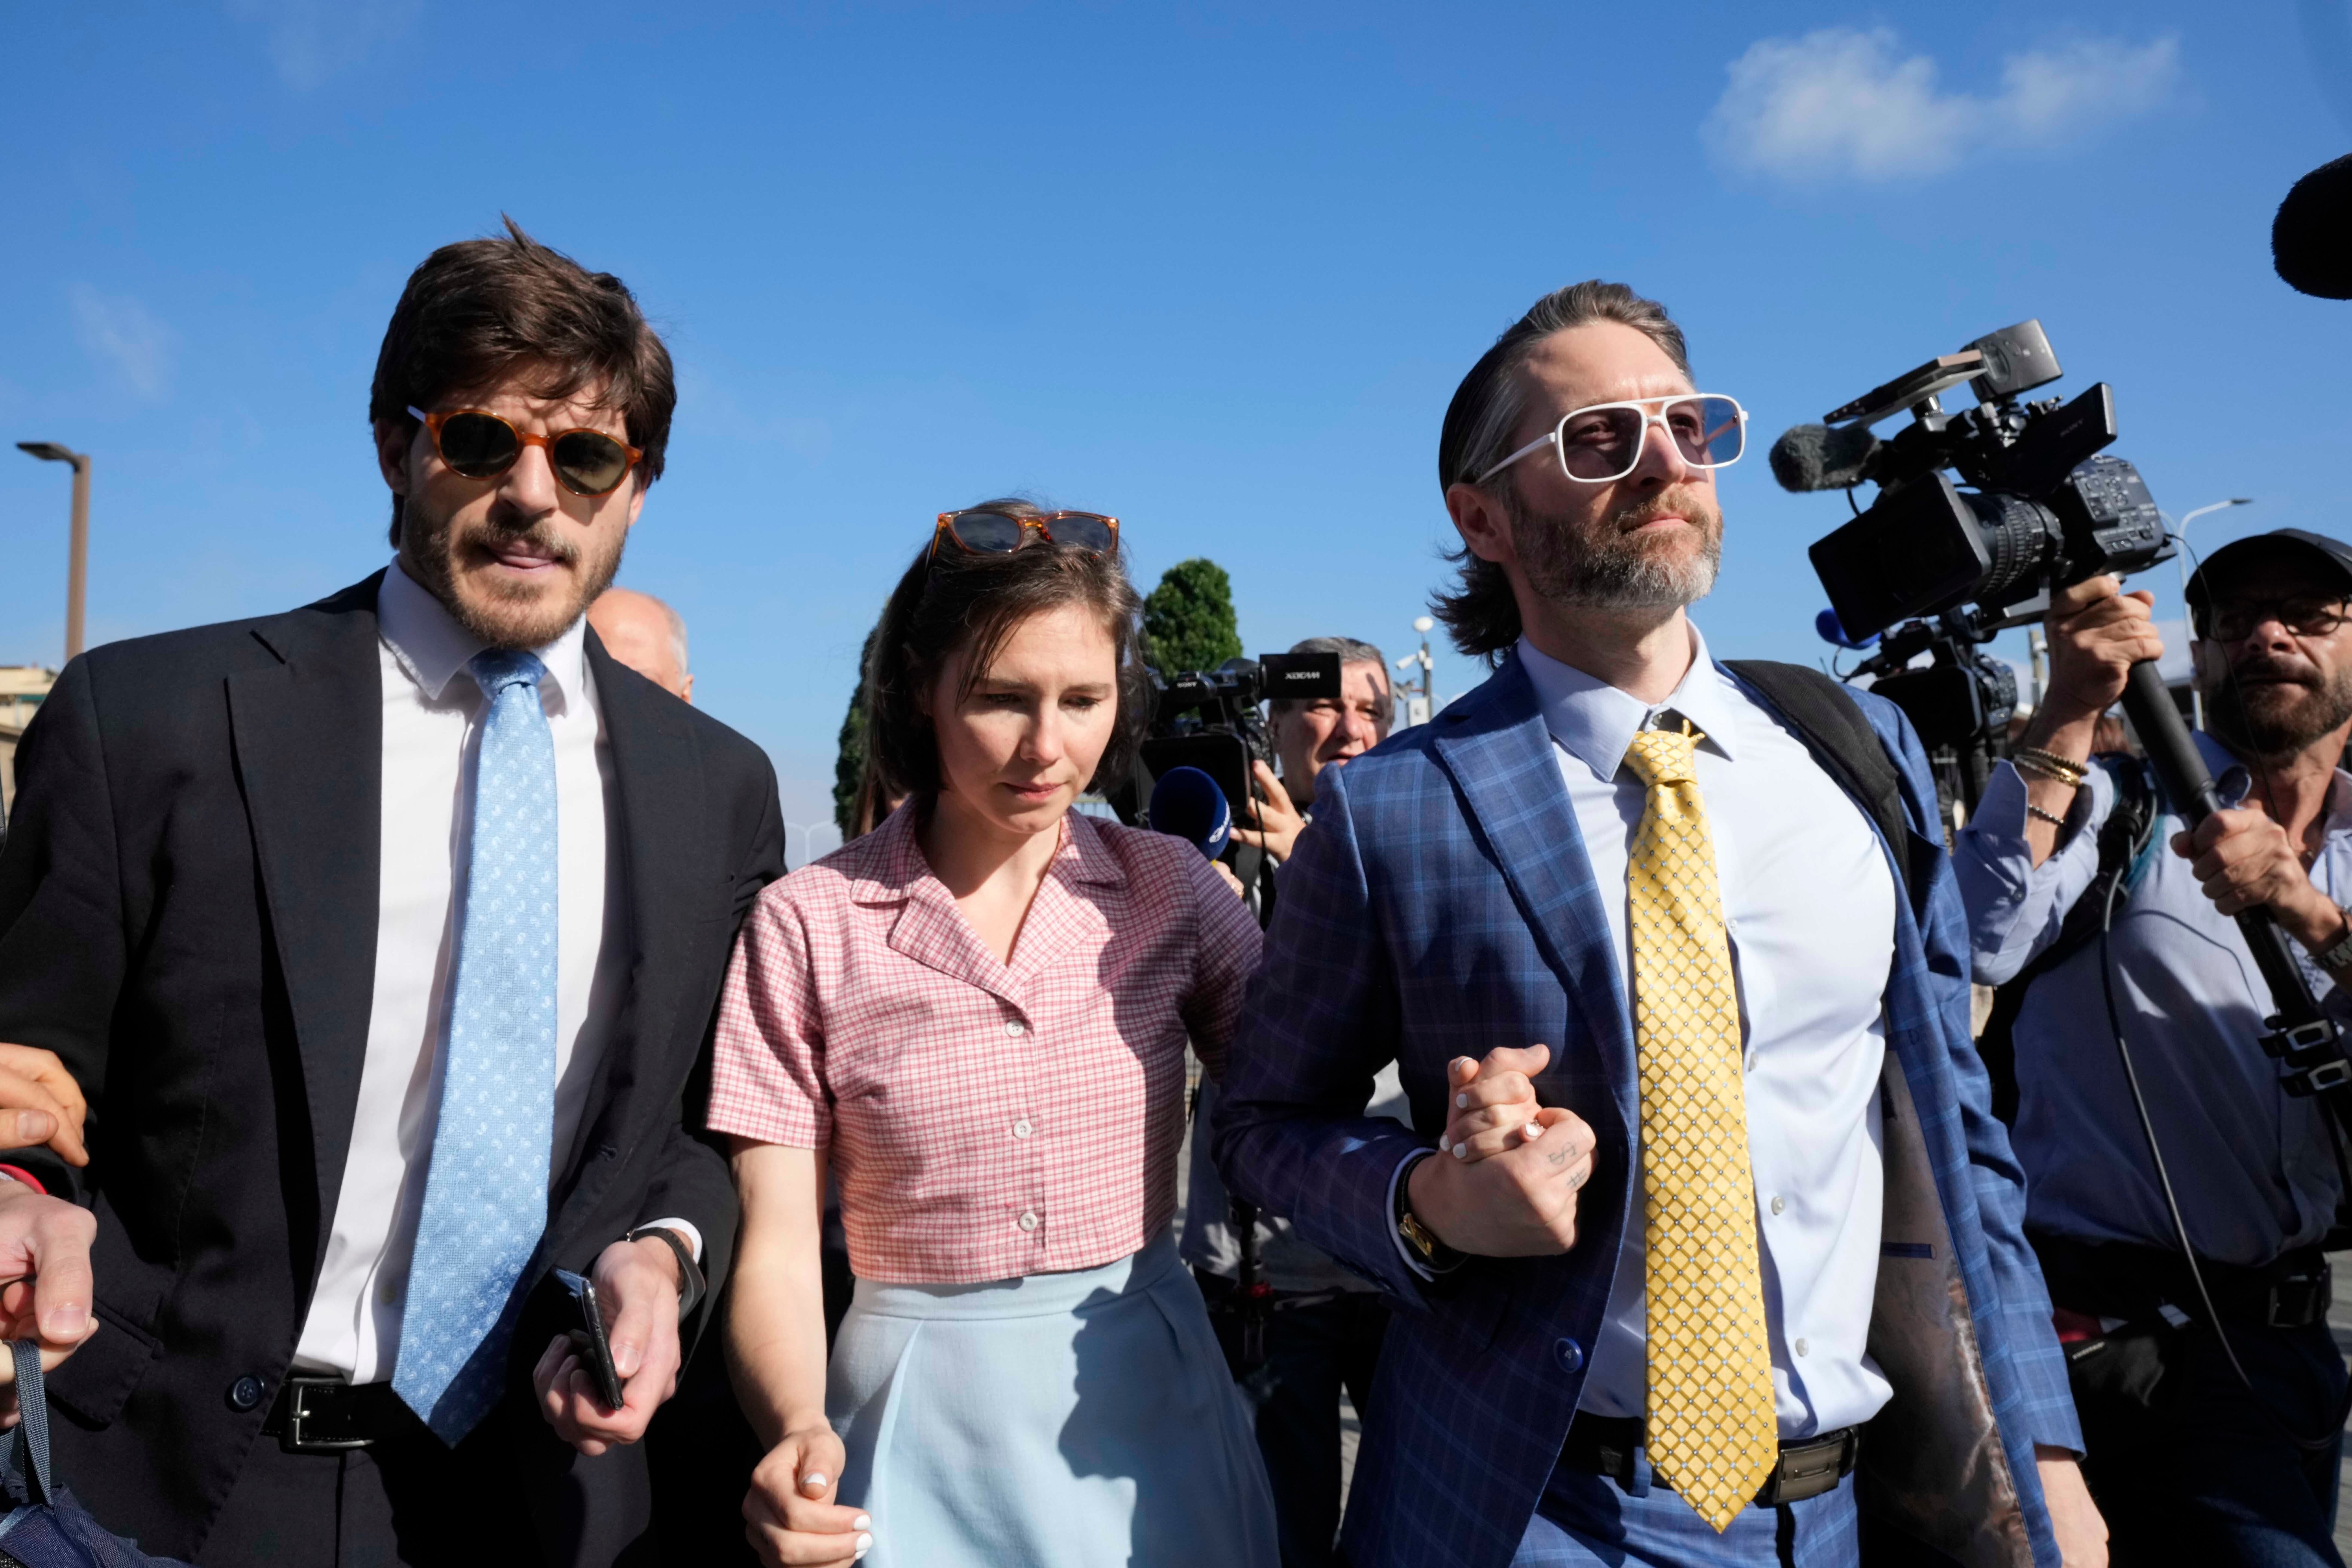 Knox arrives flanked by her husband Christopher Robinson, right, and her lawyer Luca Luparia Donati